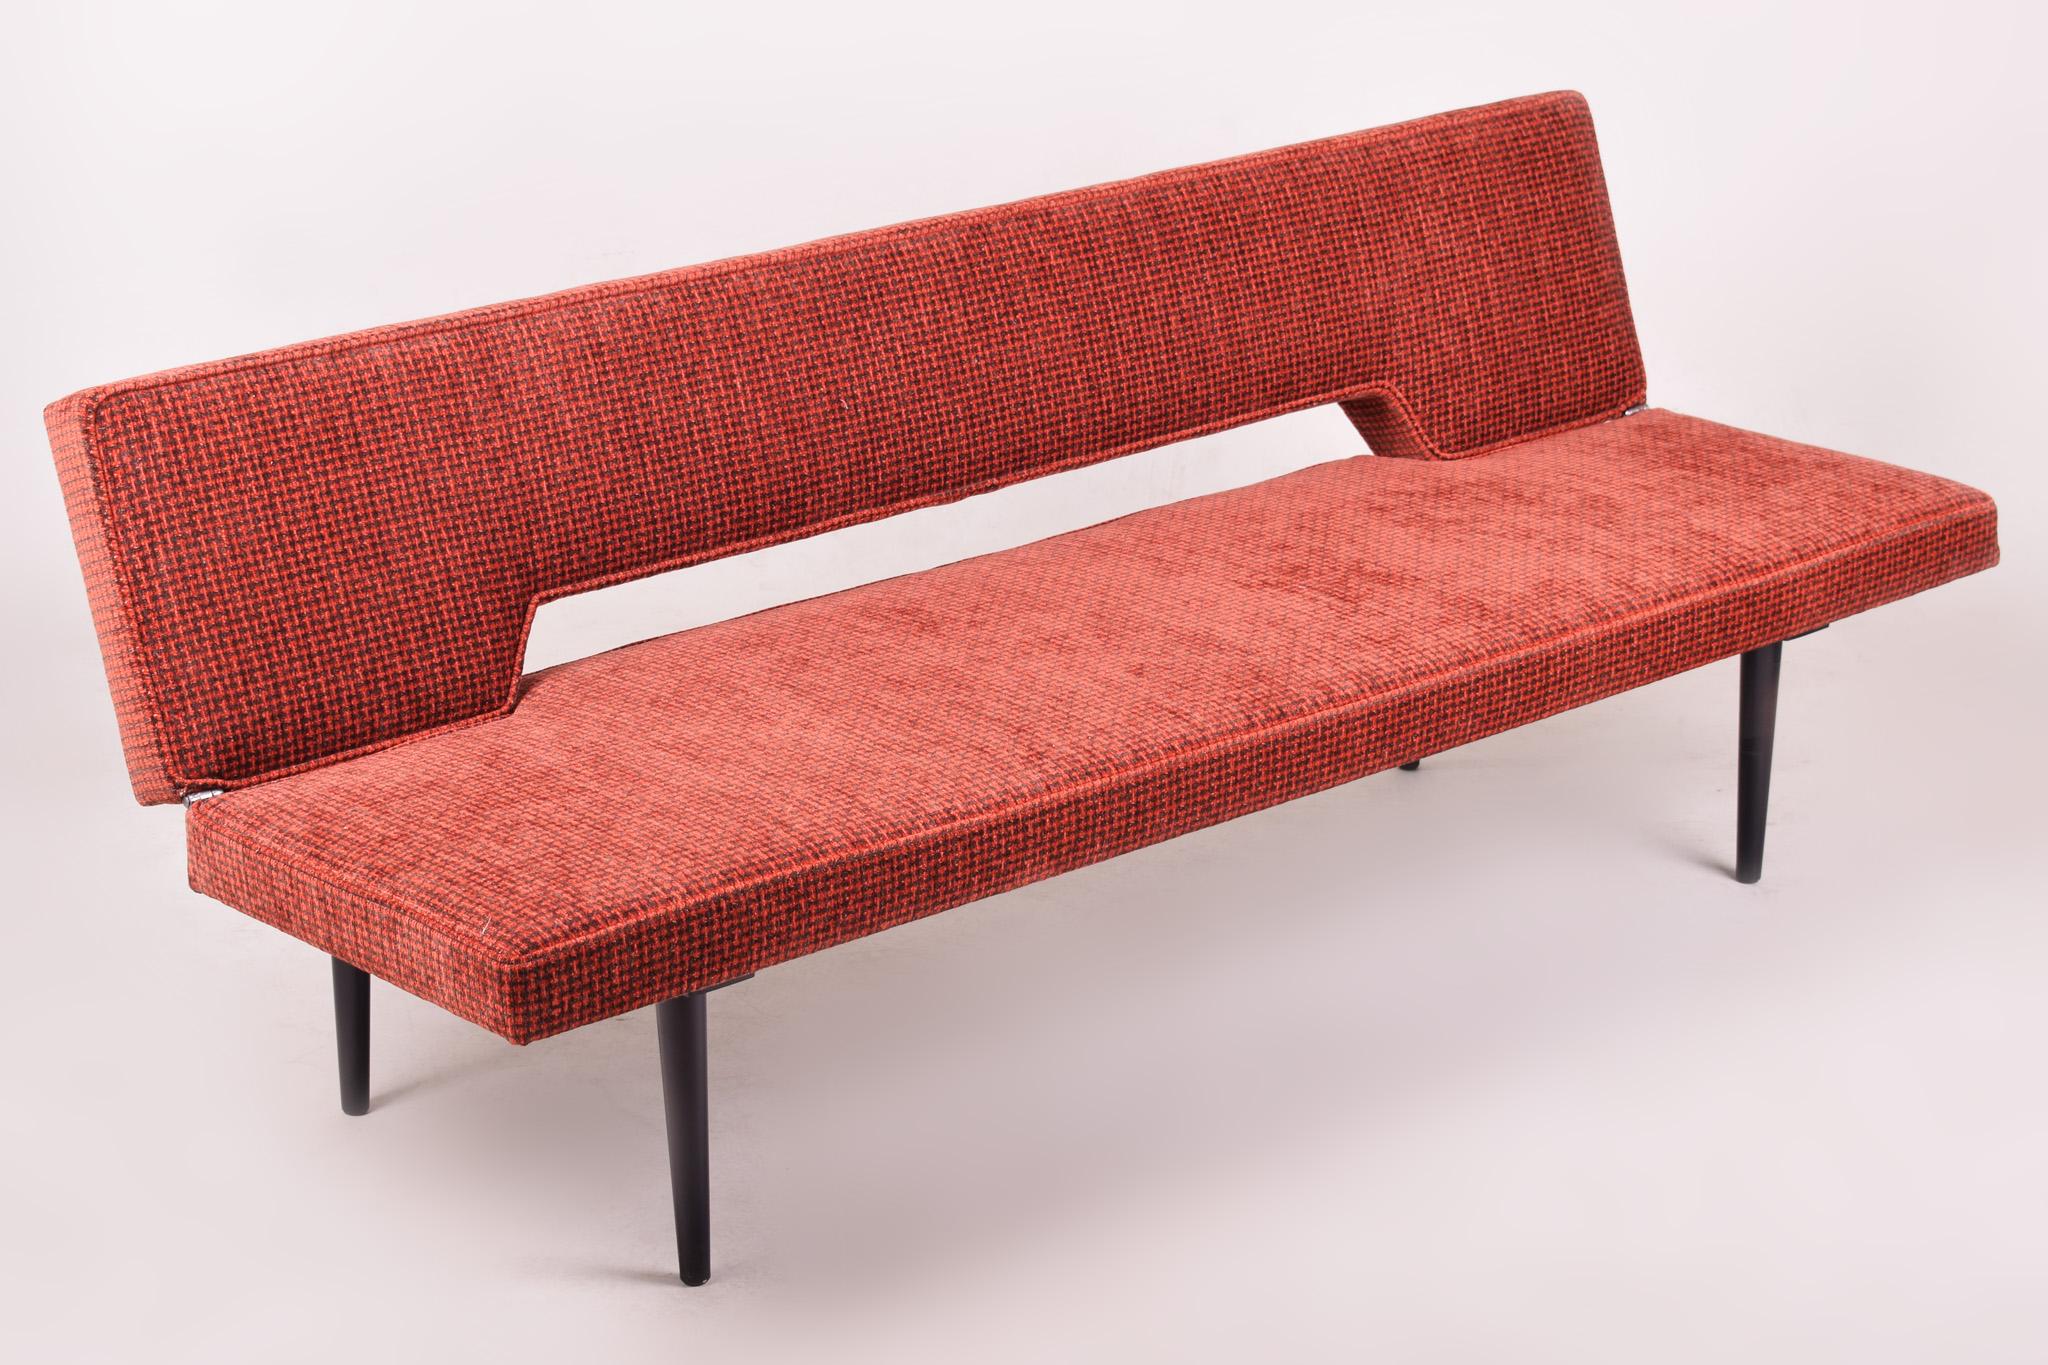 Salmon Midcentury Modern Sofa Made and Designed in 1962 by Miroslav Navratil In Good Condition For Sale In Horomerice, CZ